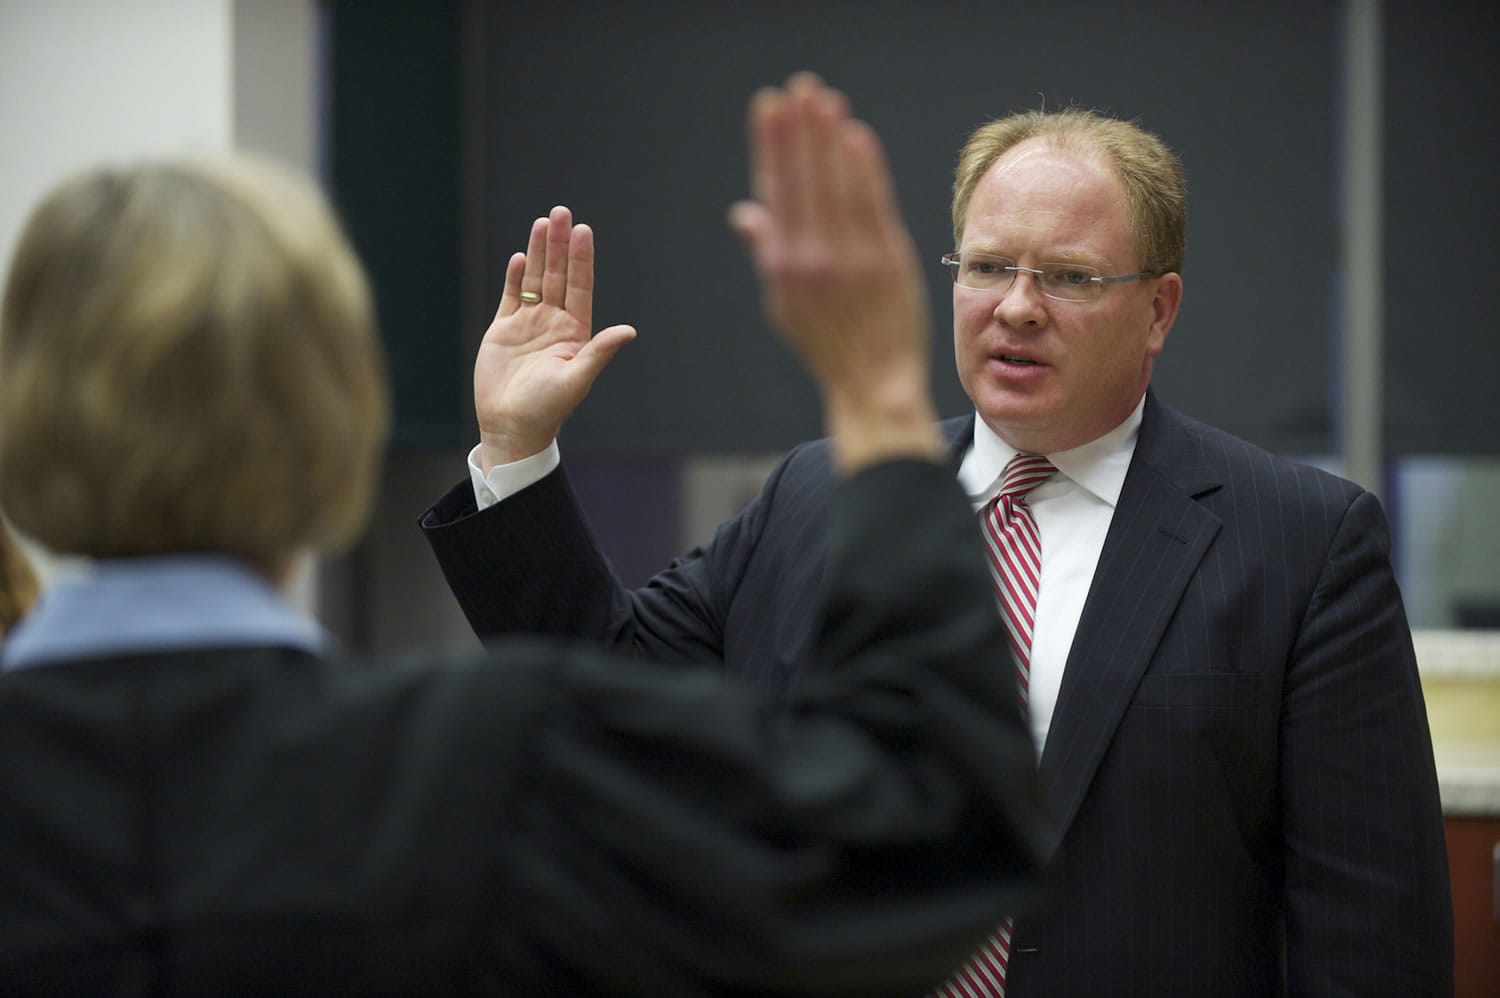 Clark County Superior Court Judge David Gregerson takes the oath of office from Judge Barbara Johnson during his swearing-in ceremony Monday at the Clark County Public Service Center.